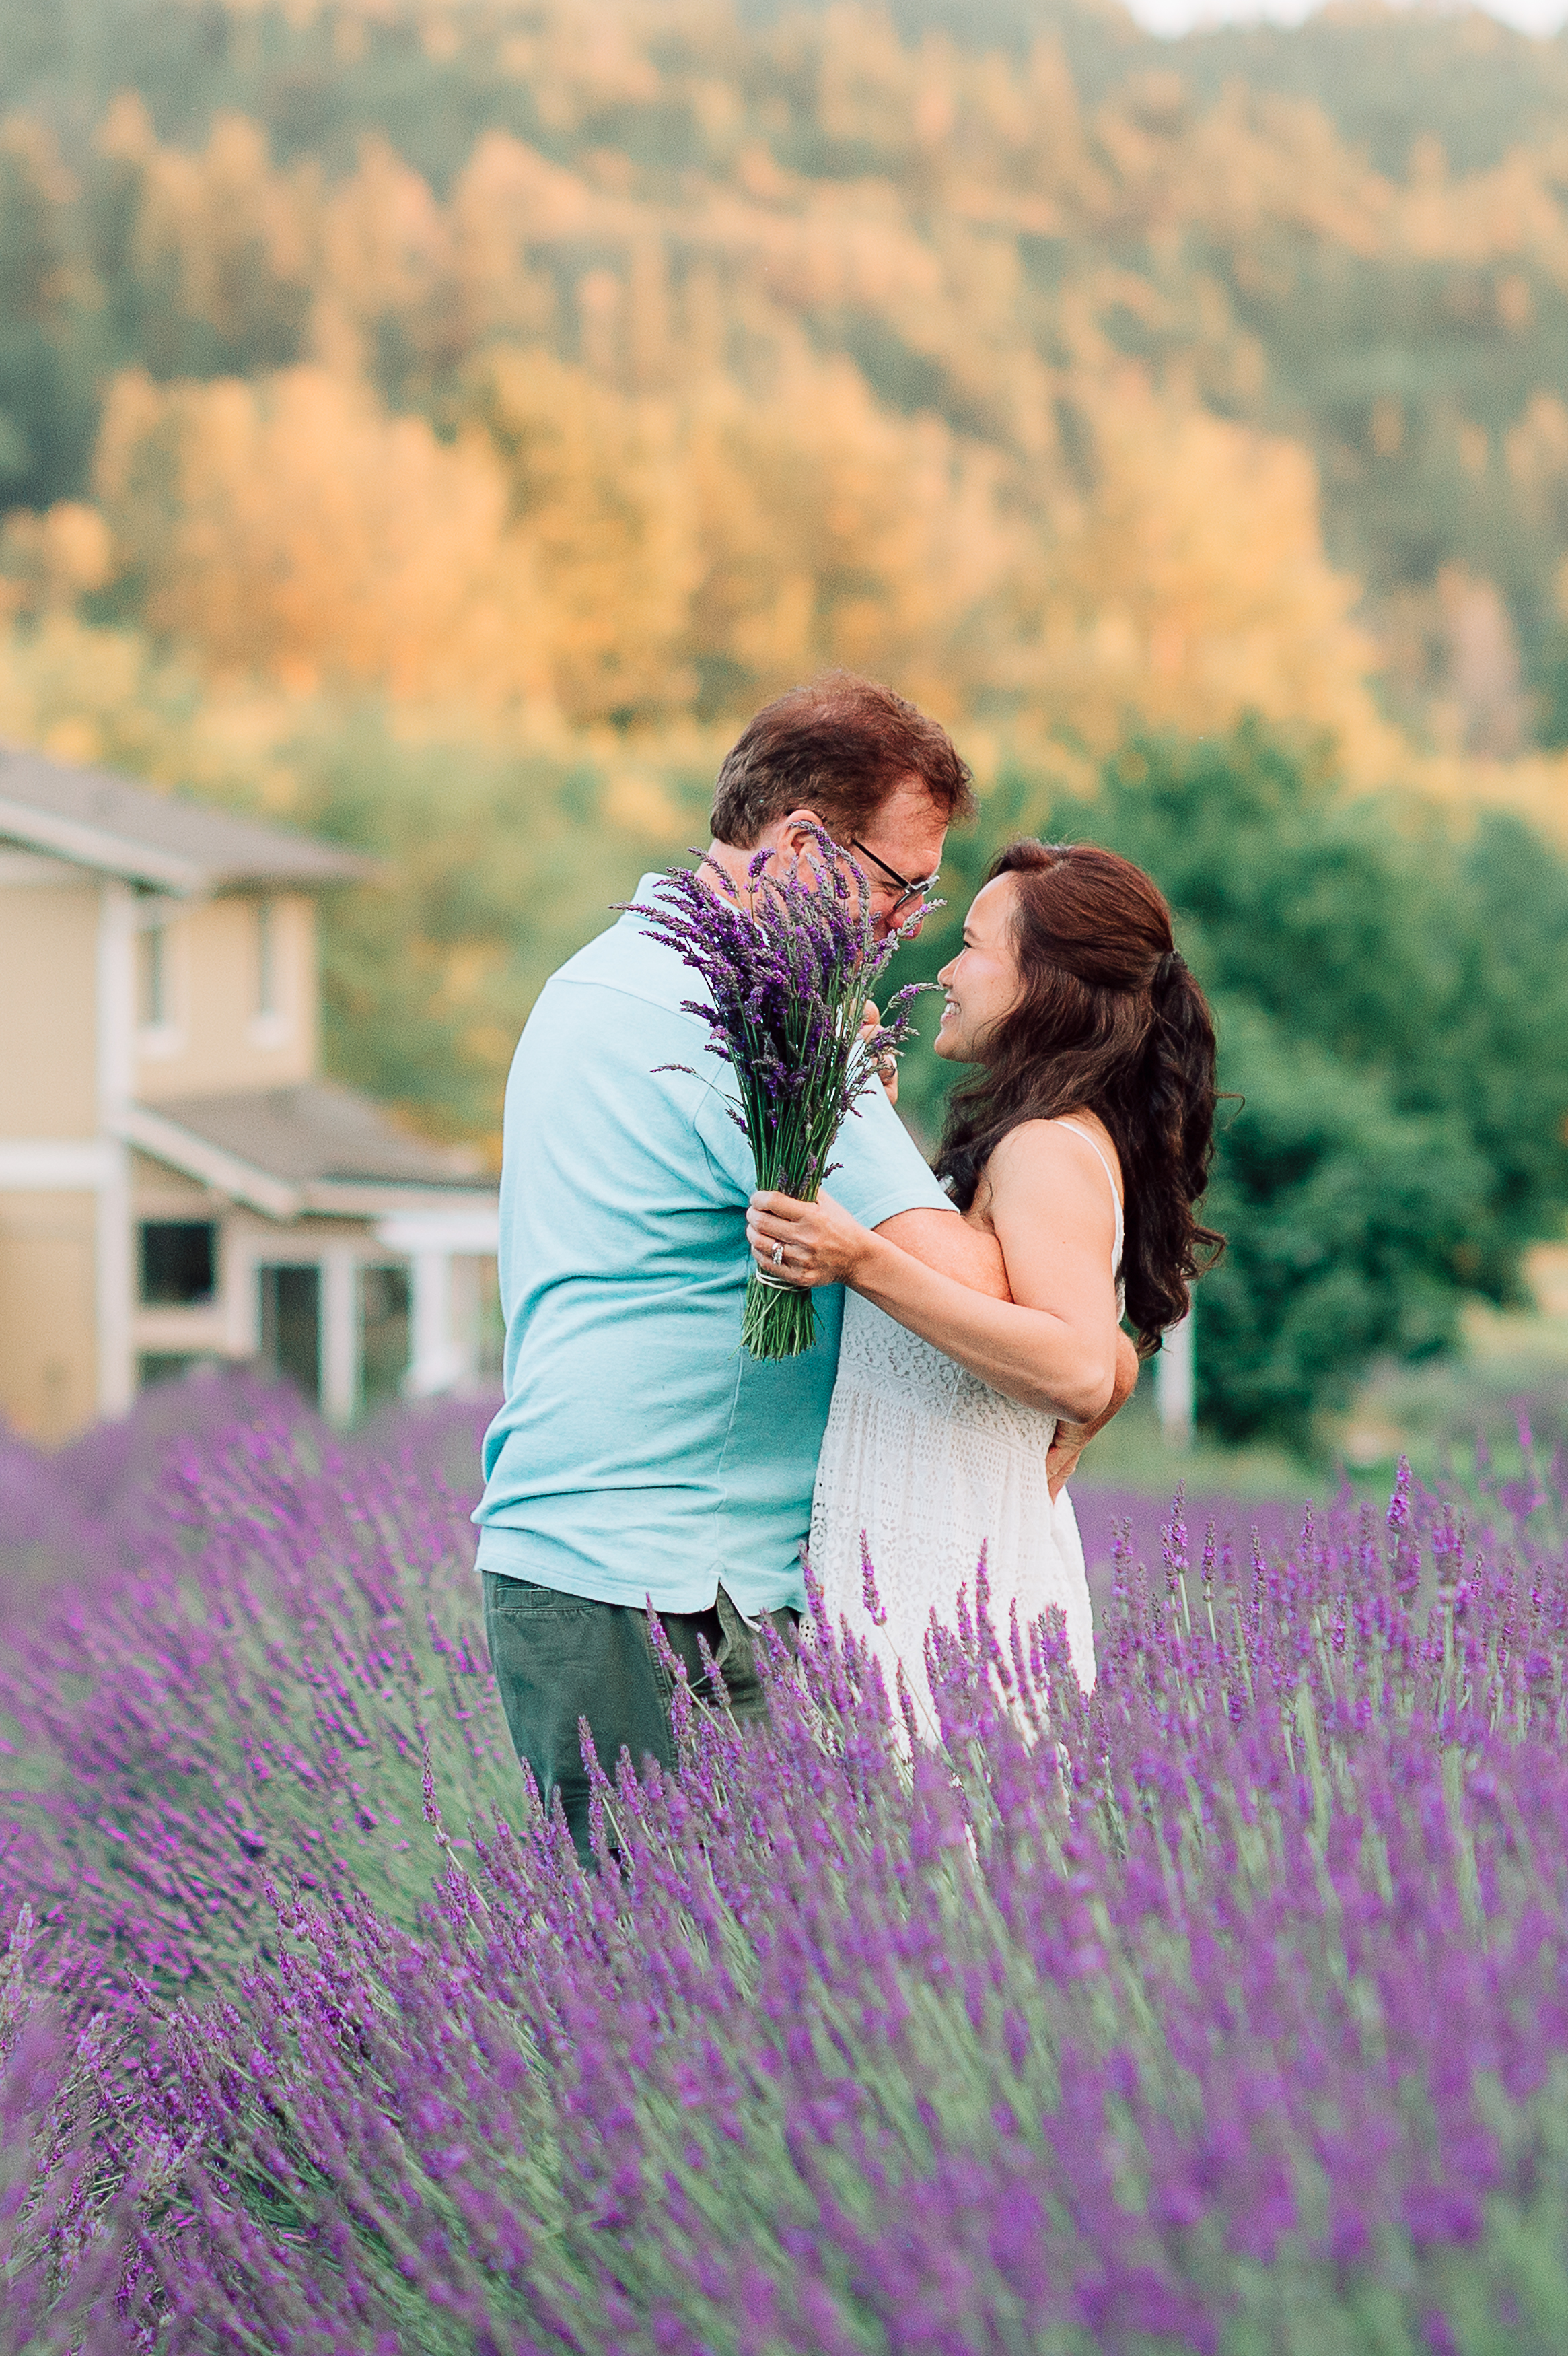 engagement_lavenderfield_youseephotography_LidiaOtto (50).jpg